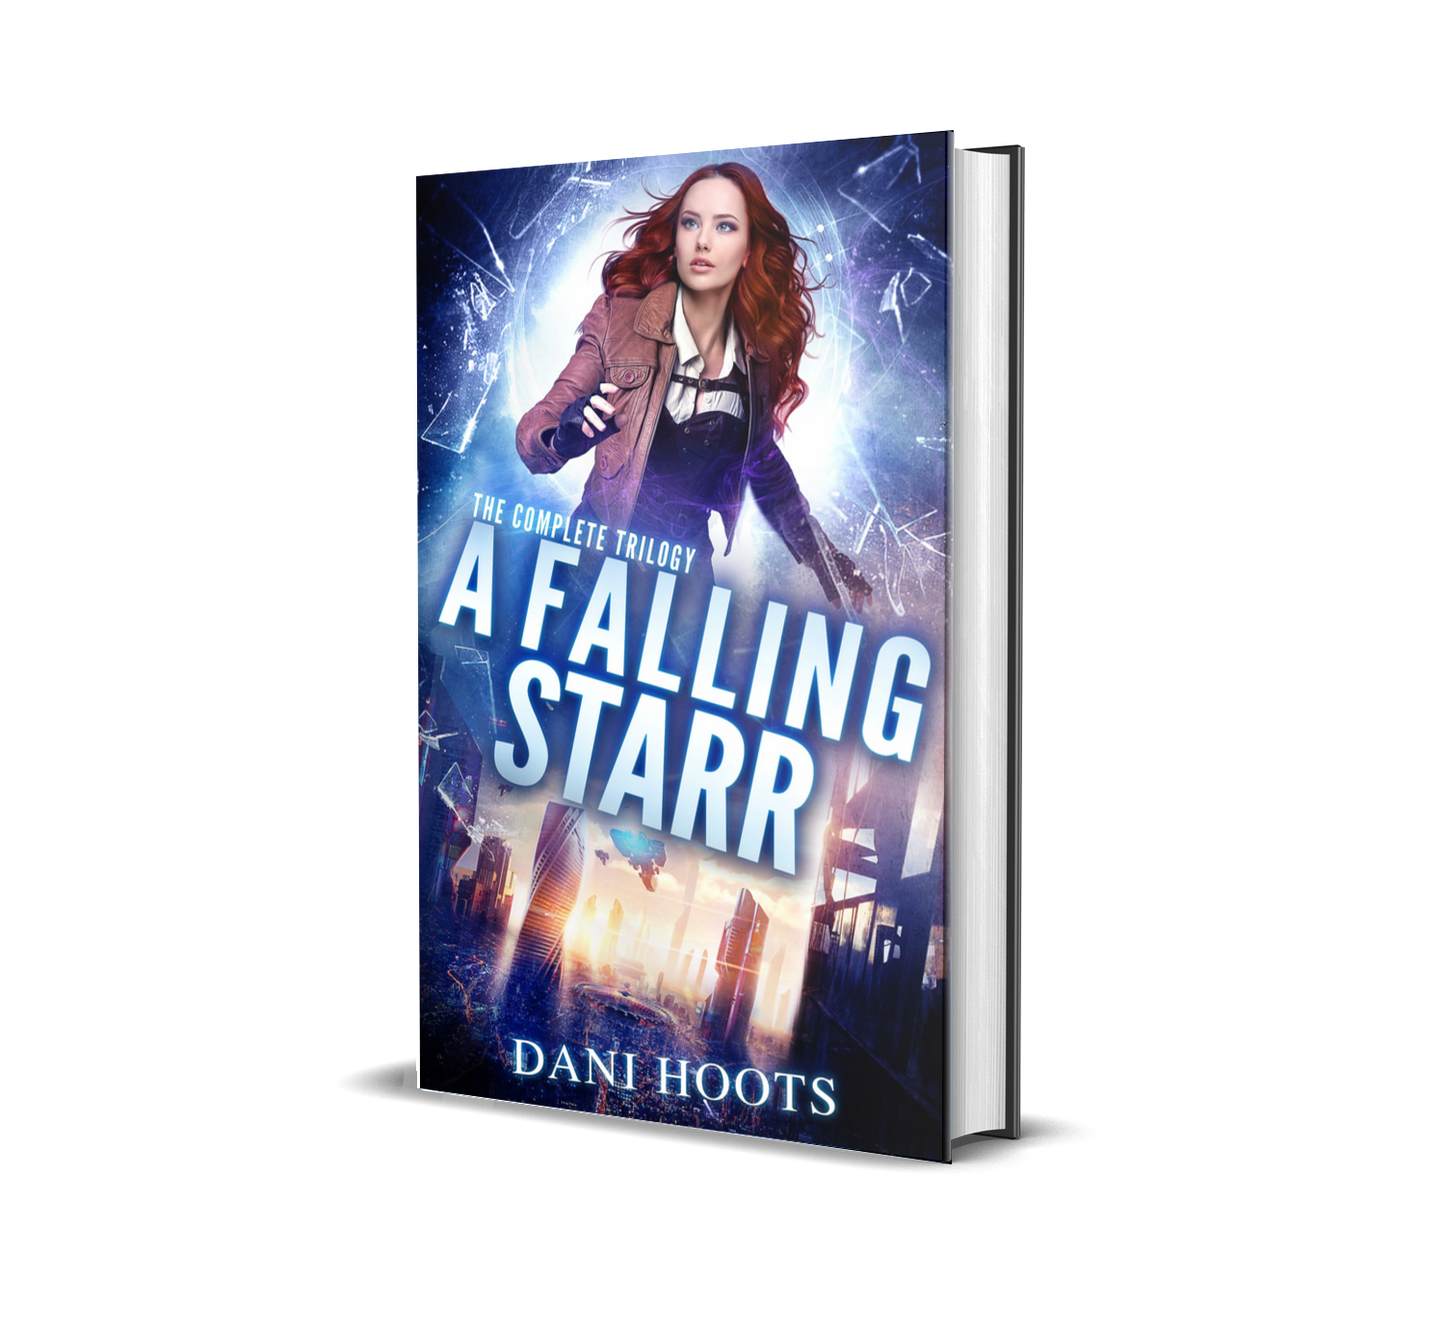 A Falling Starr (Standalone) hardcover — SIGNED